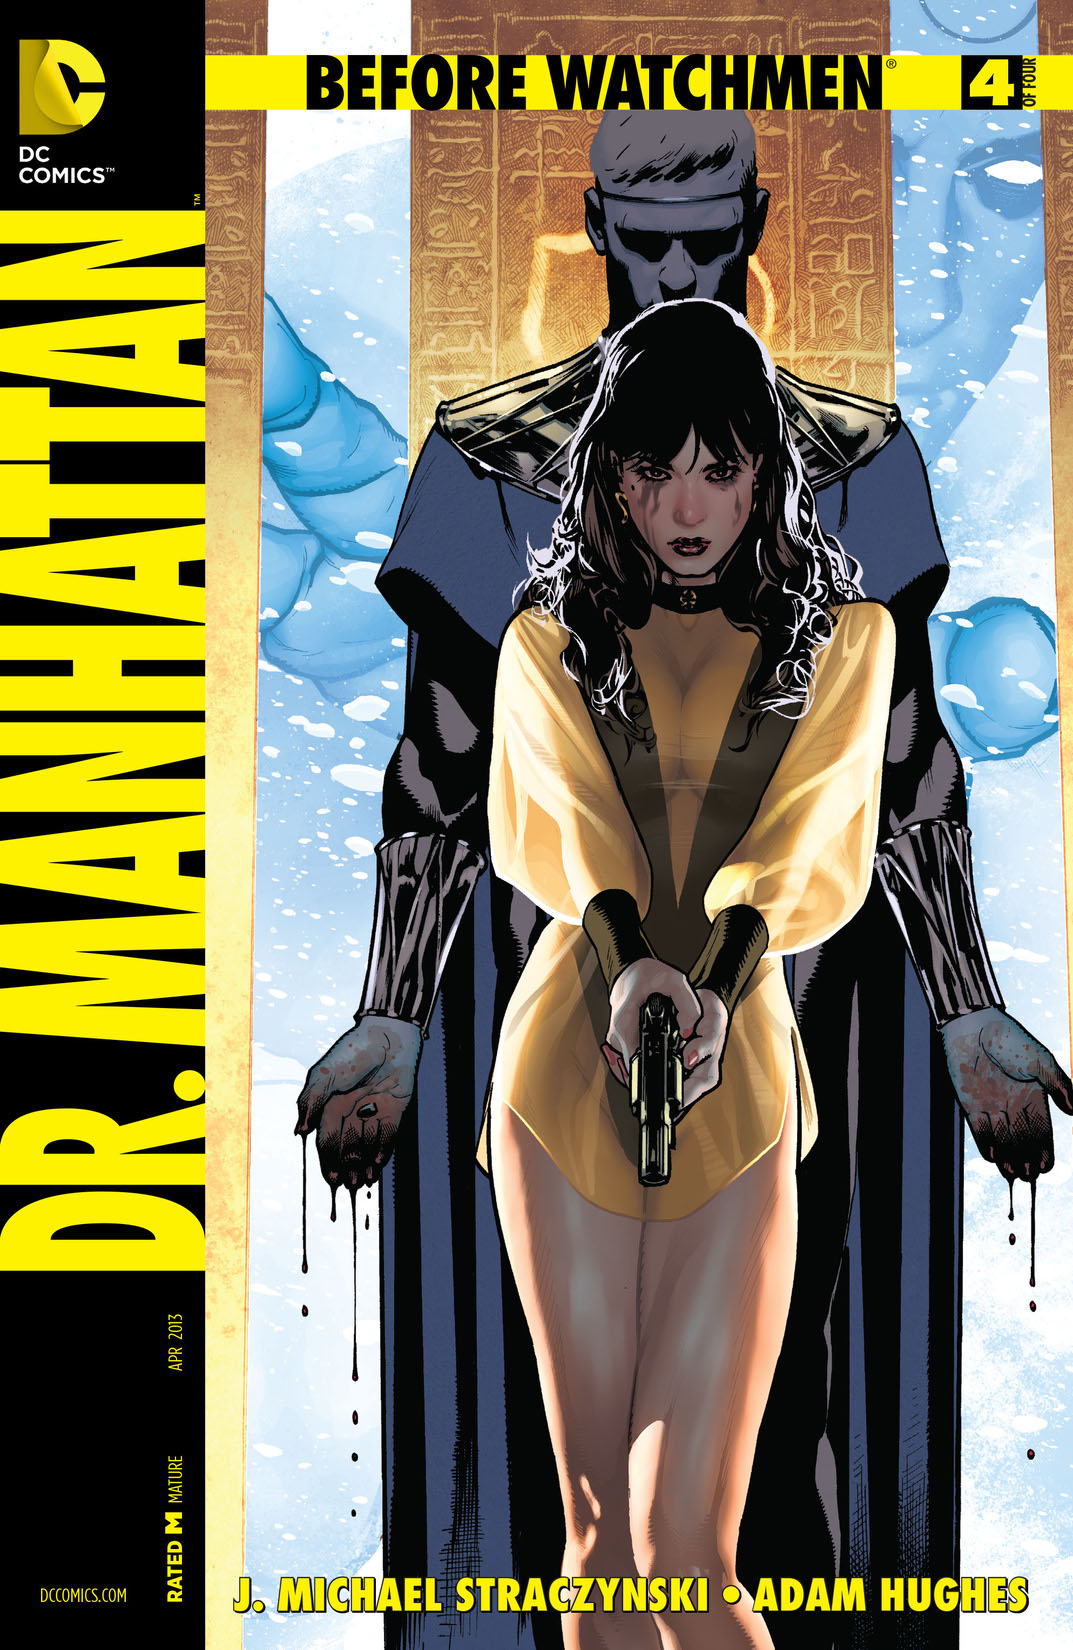 Before Watchmen: Dr. Manhattan #4 preview images